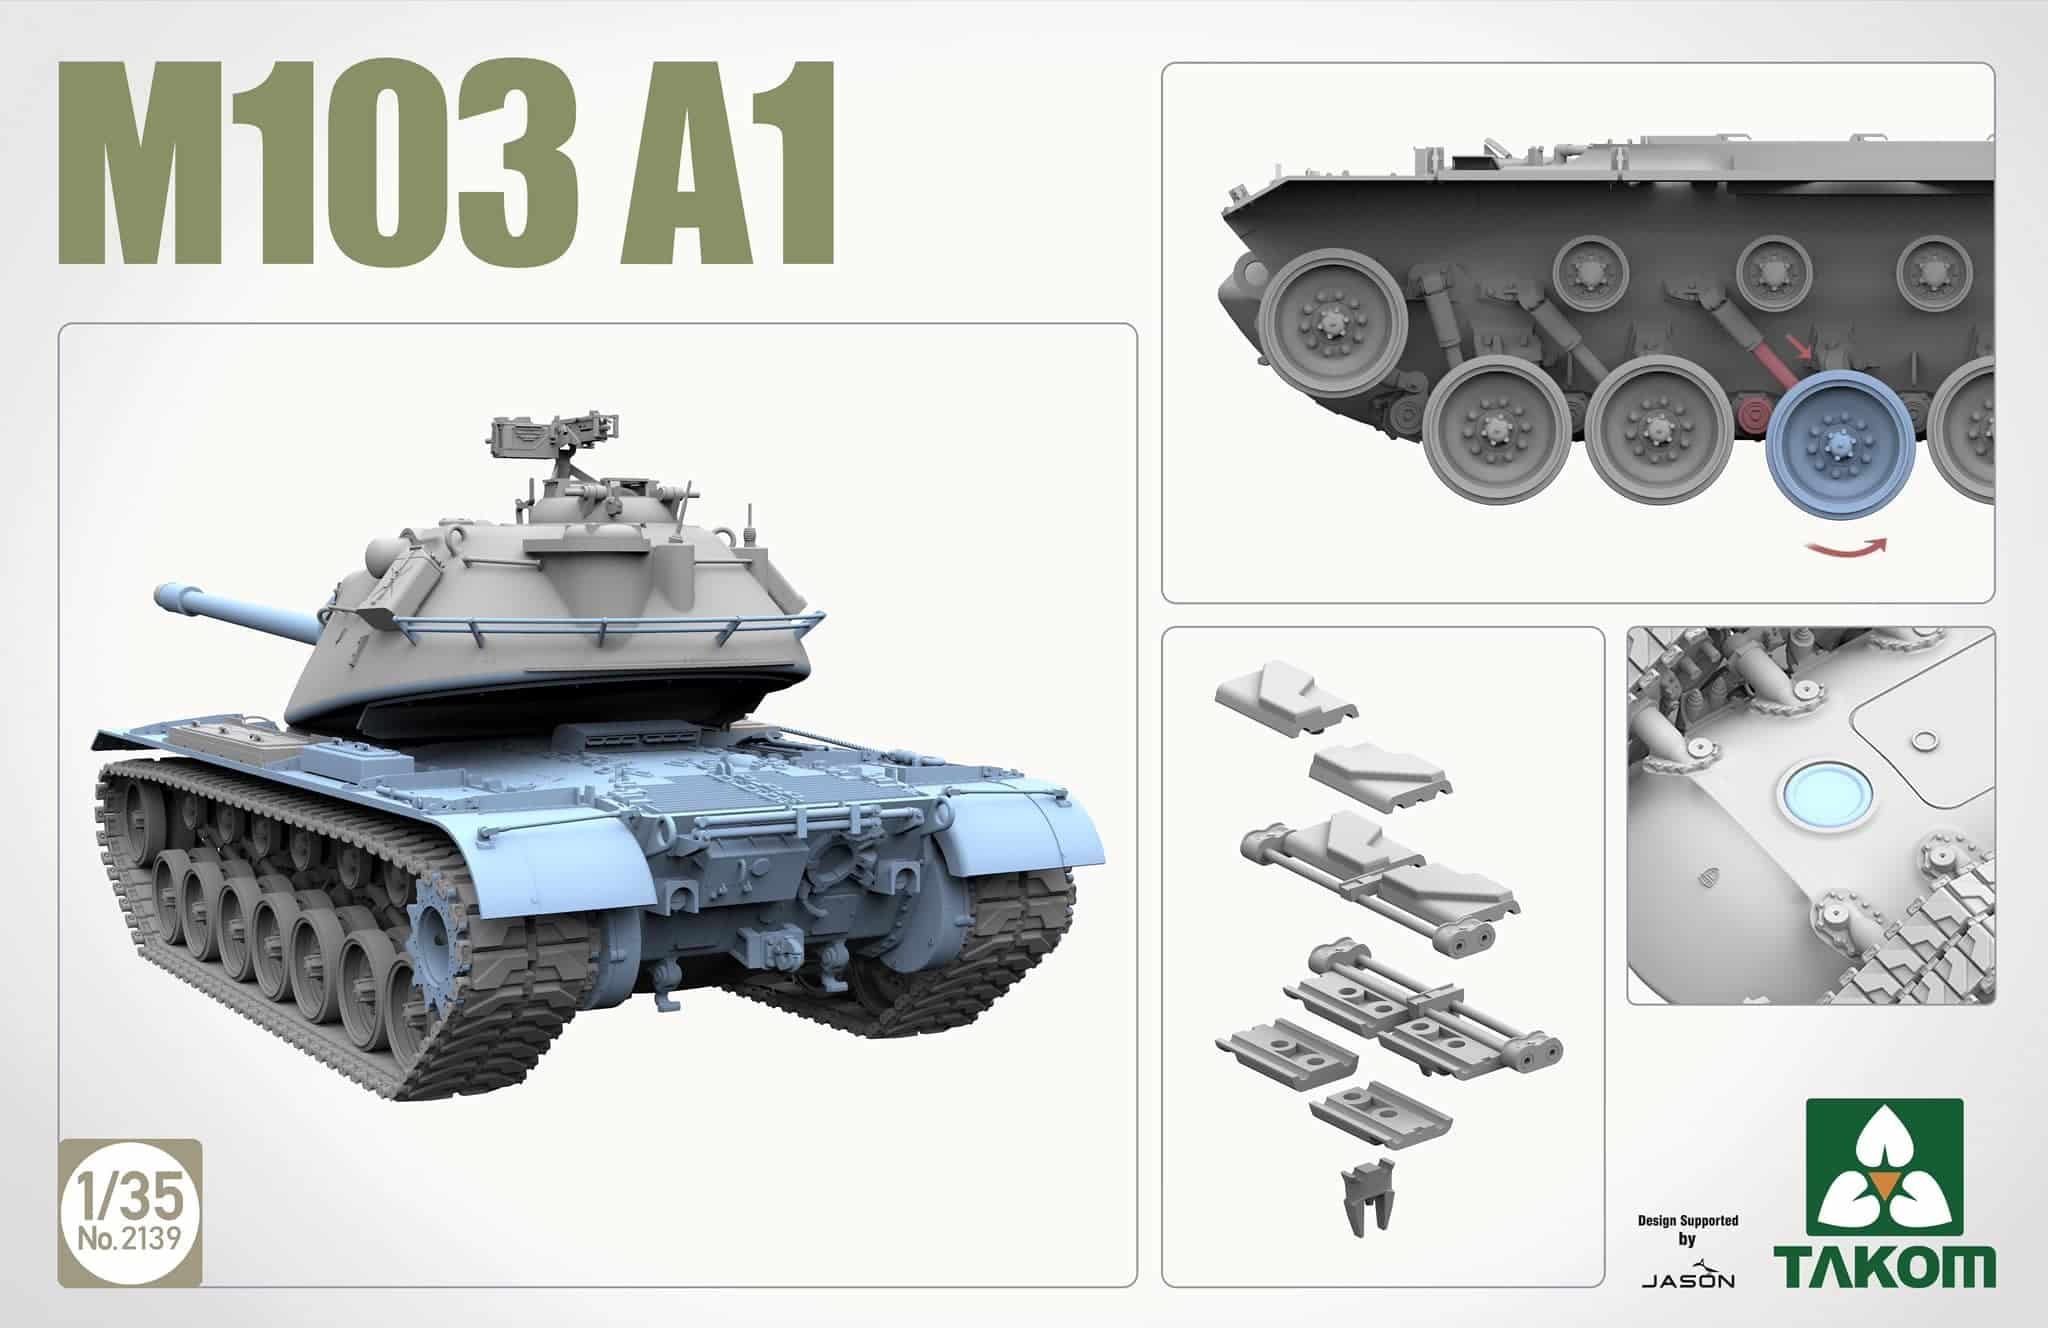 M103A1 & M103A2 from Takom-3